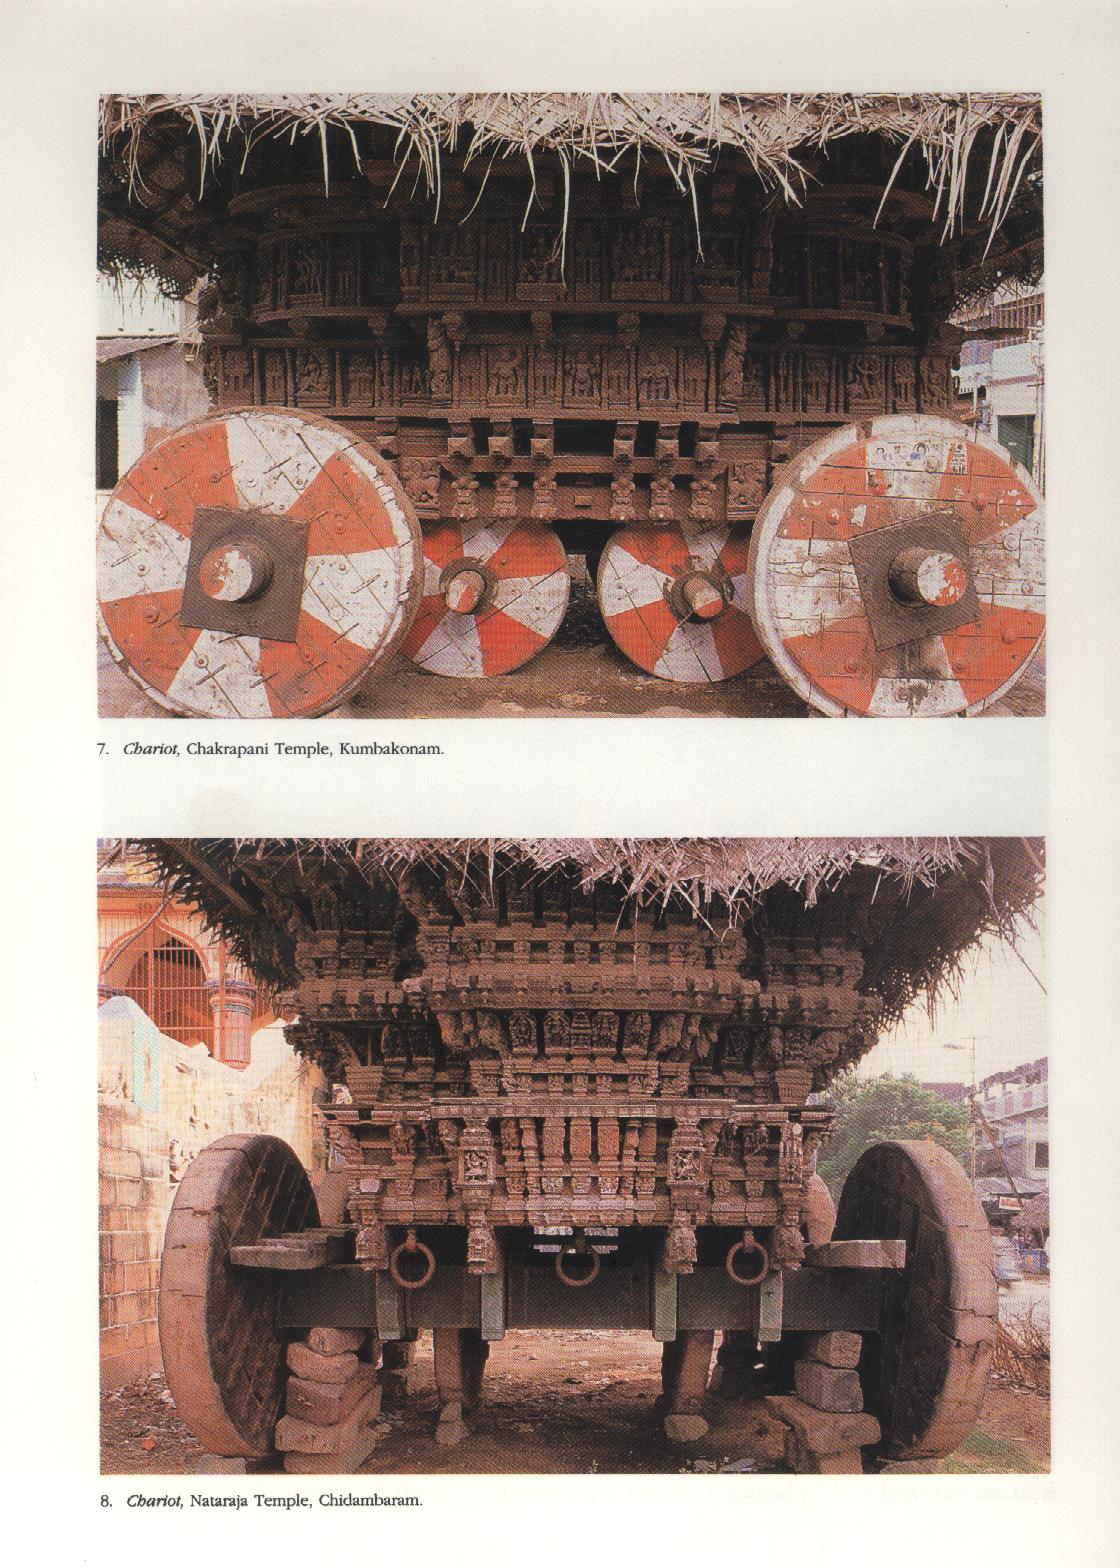 Rathas (or temple chariots)